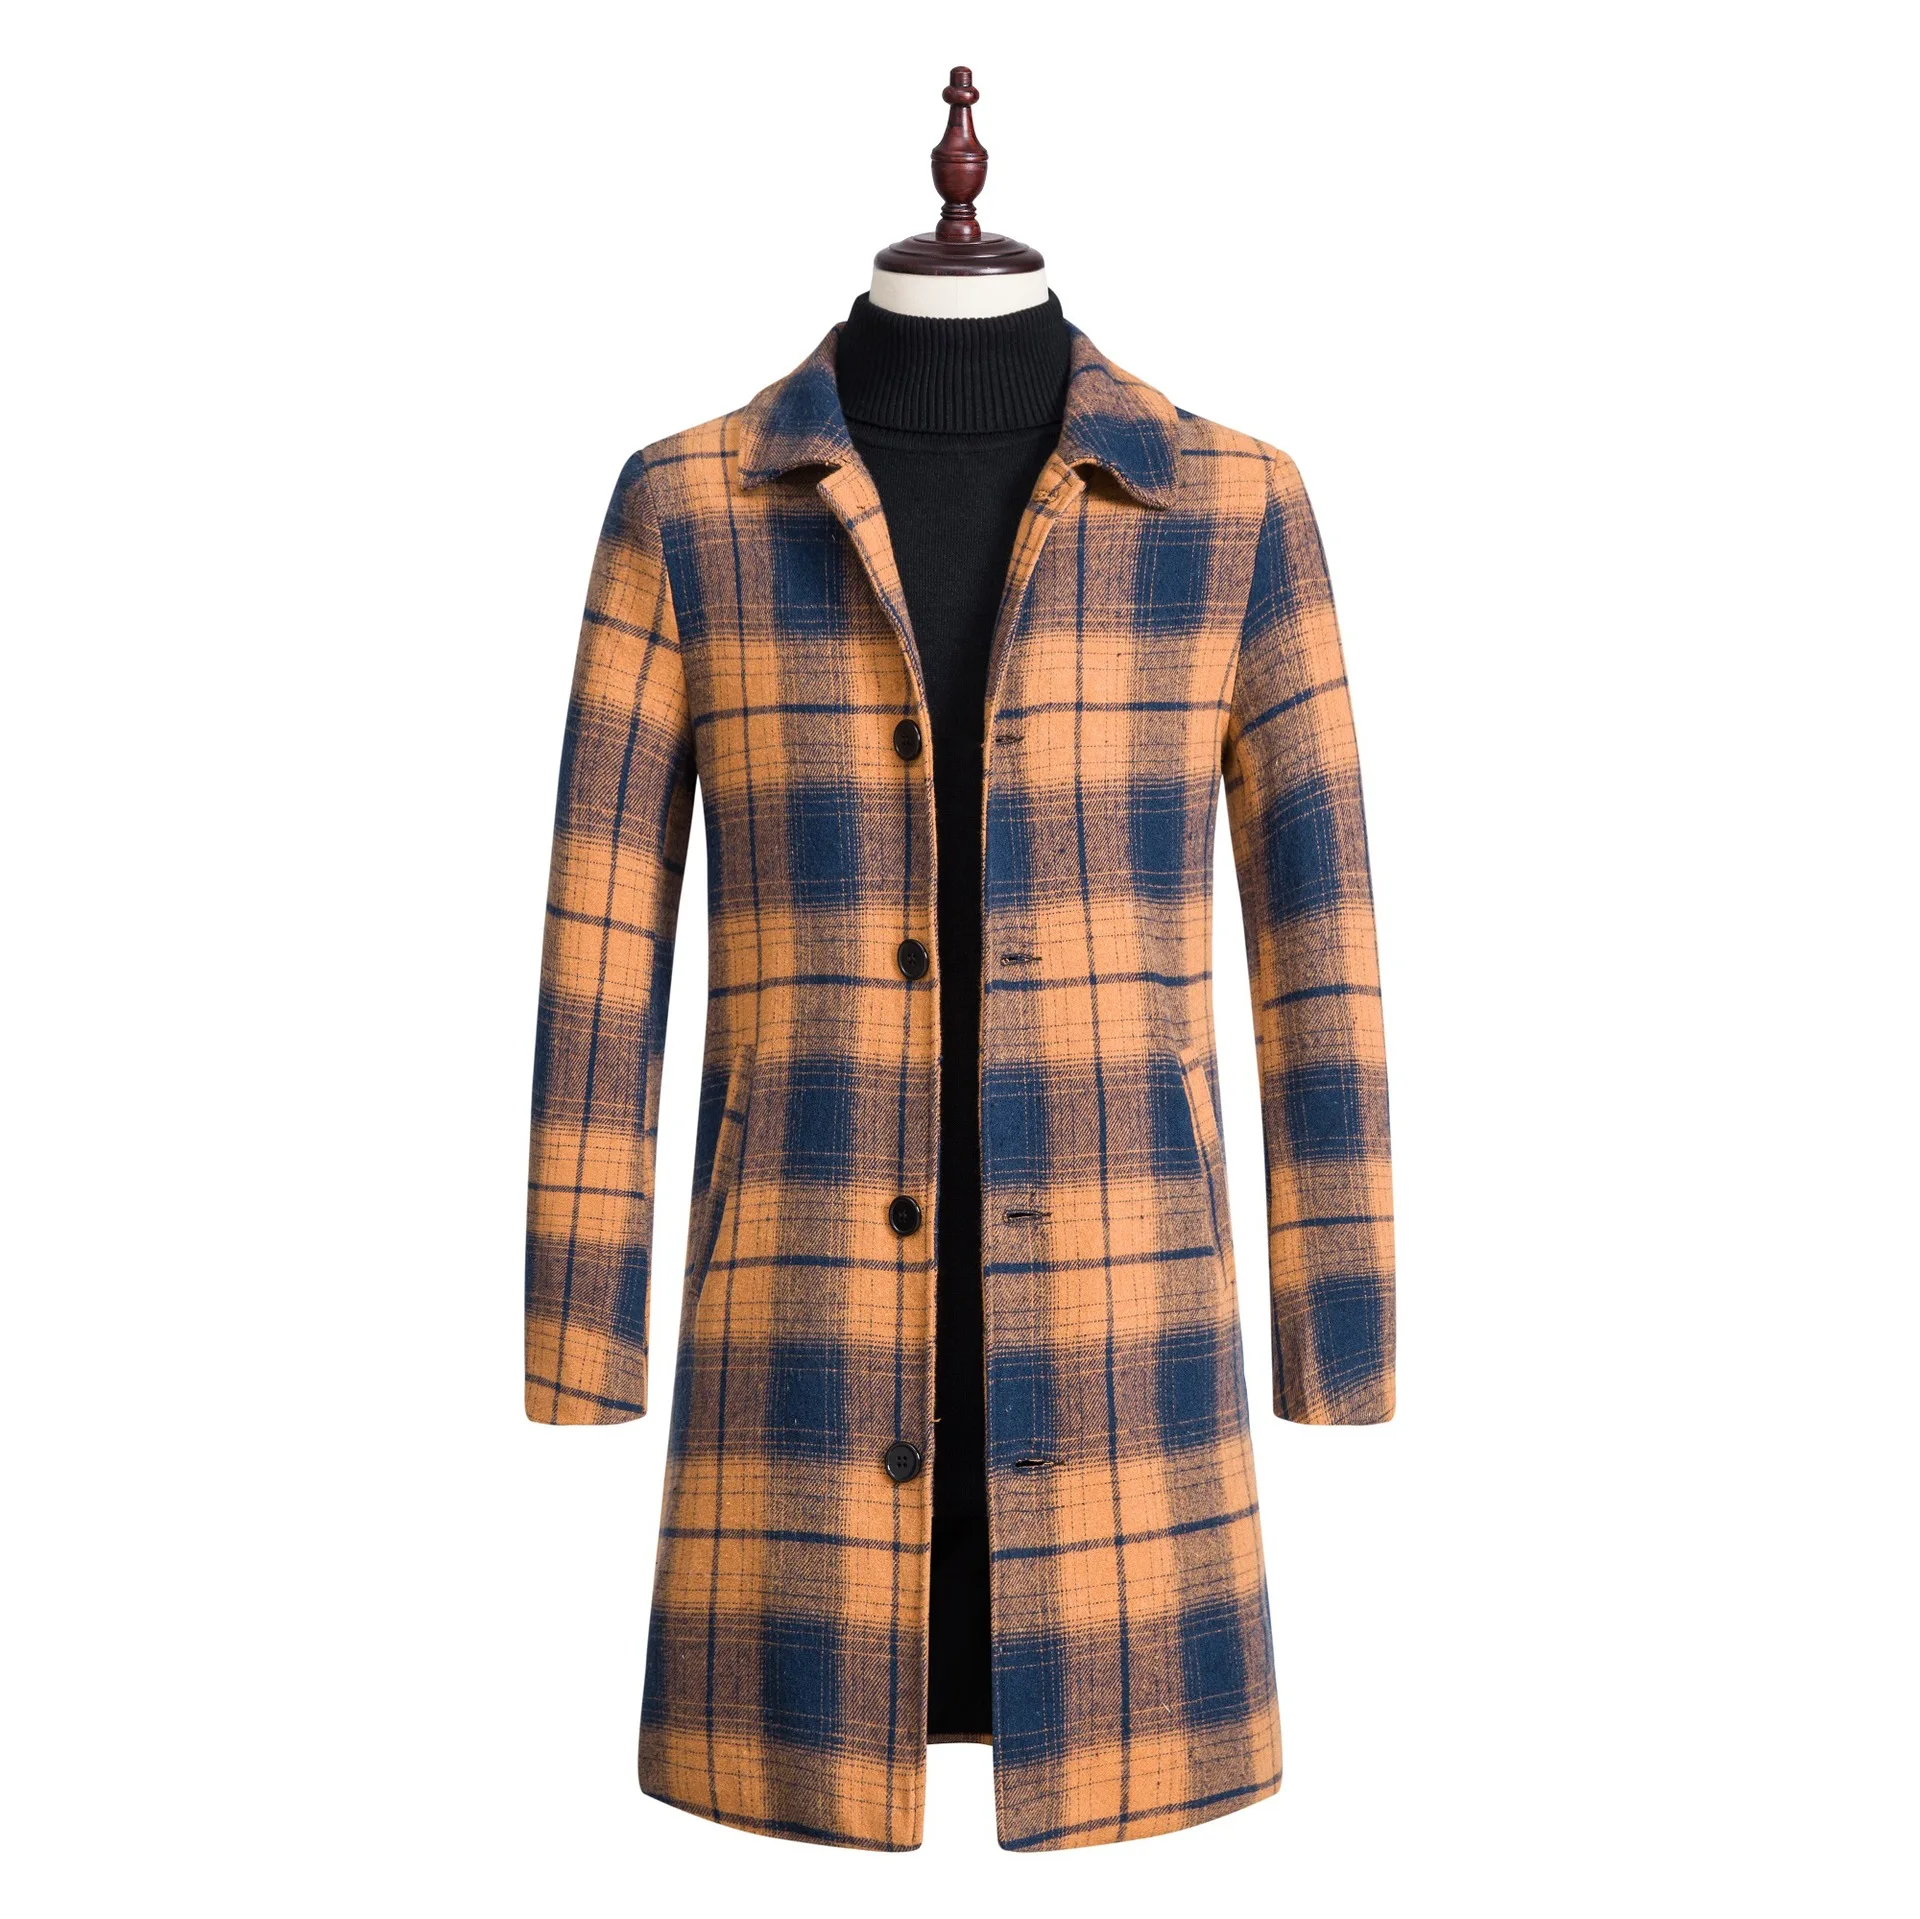 

Wholesale Top Selling Woolen Men Trench Coat Winter Mens Windbreaker Trench Coat 2021 Plaid Trench Coat, Picture shows